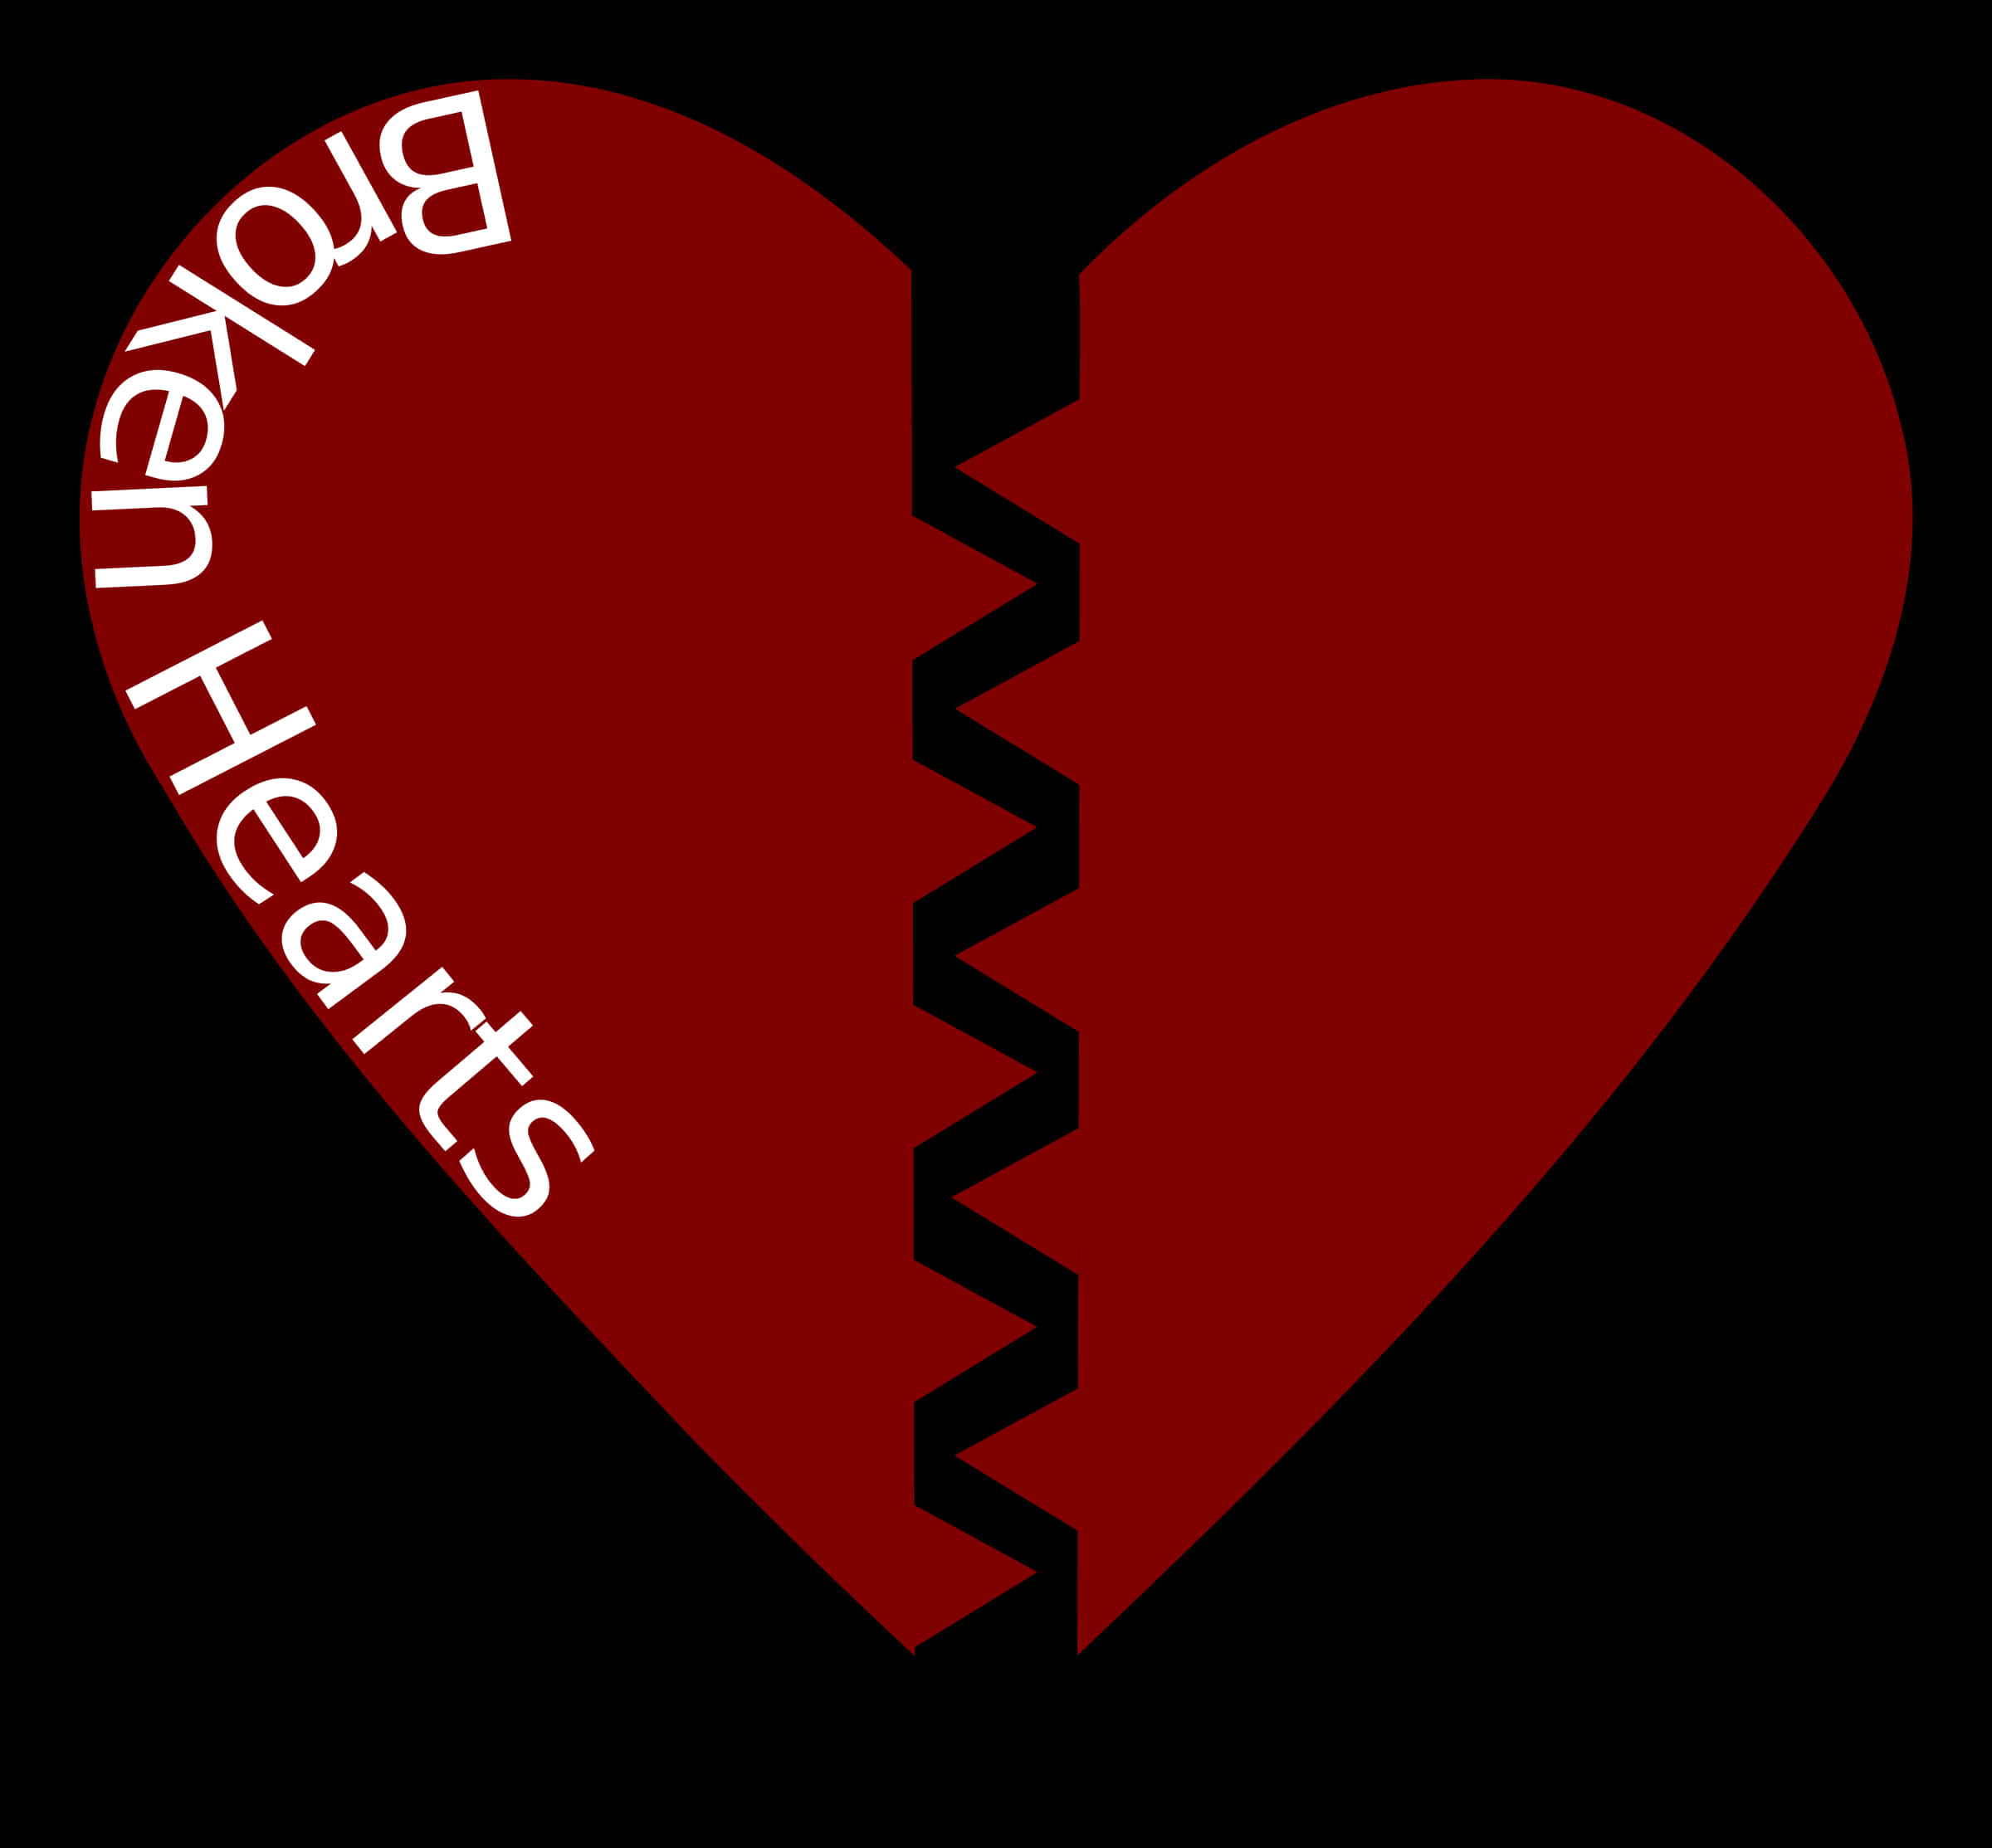 A Red Heart With White Text